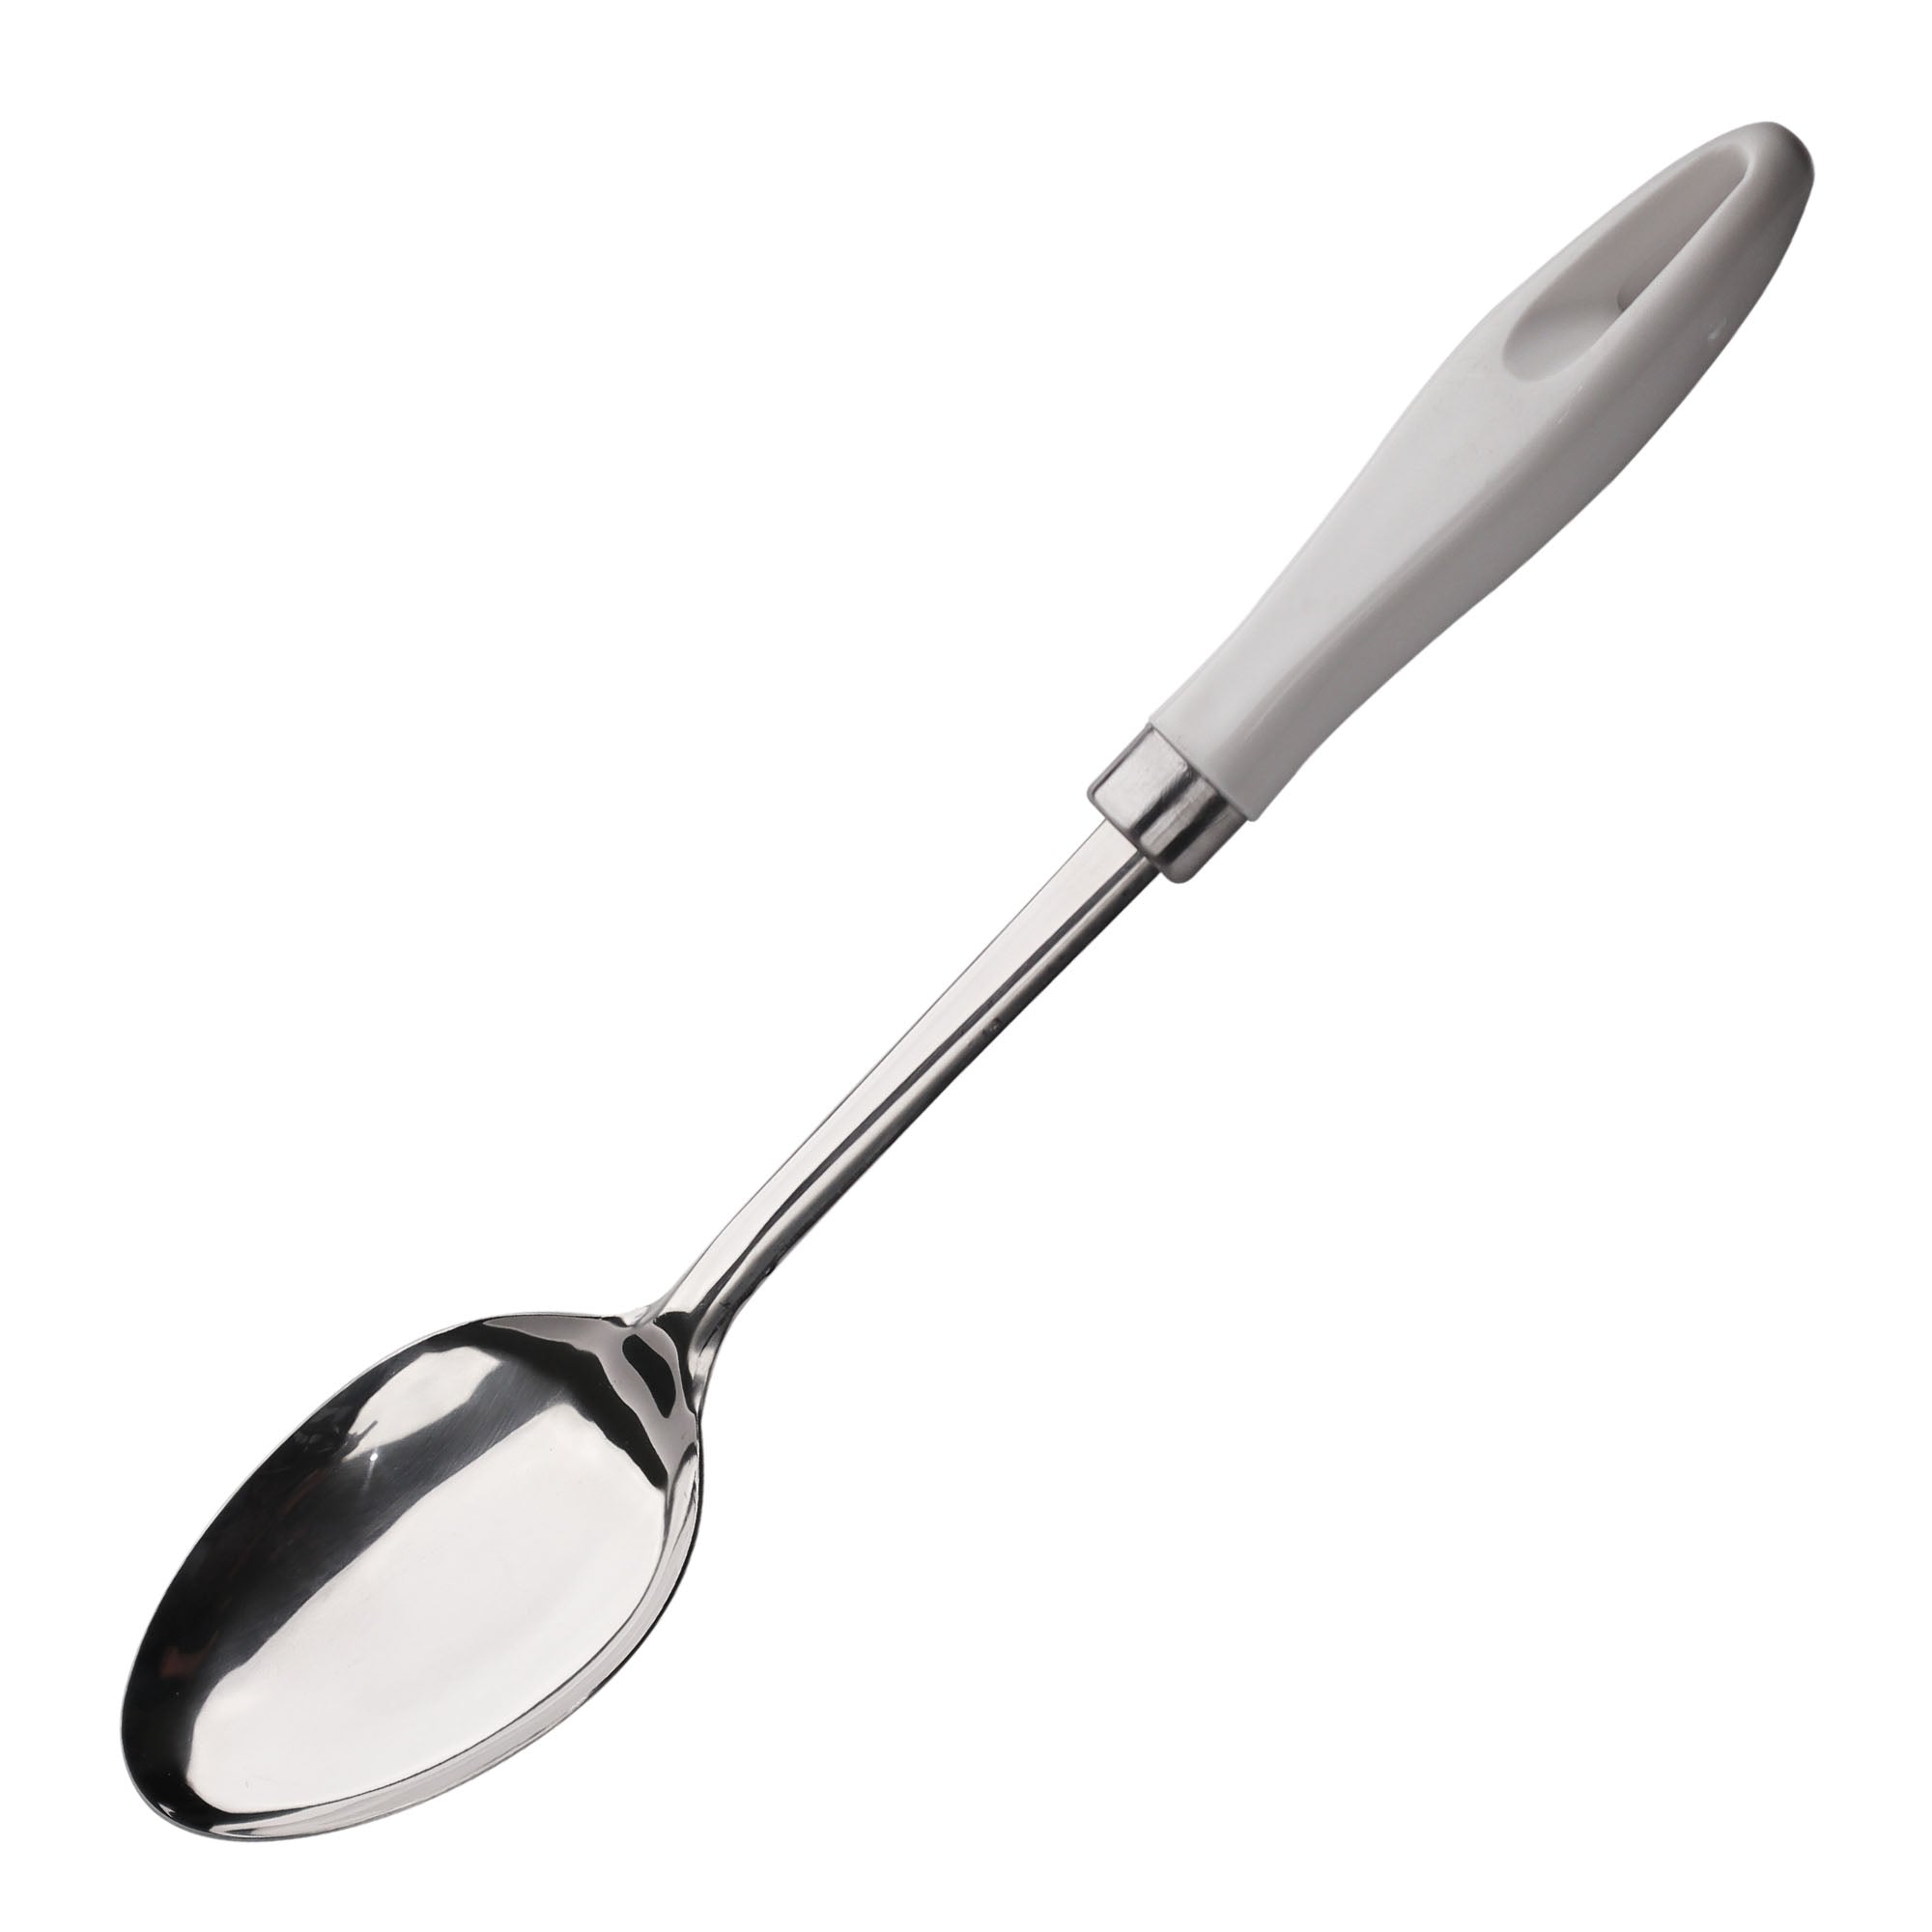 Chef Stainless Steel Dish Serving Spoon With white handle